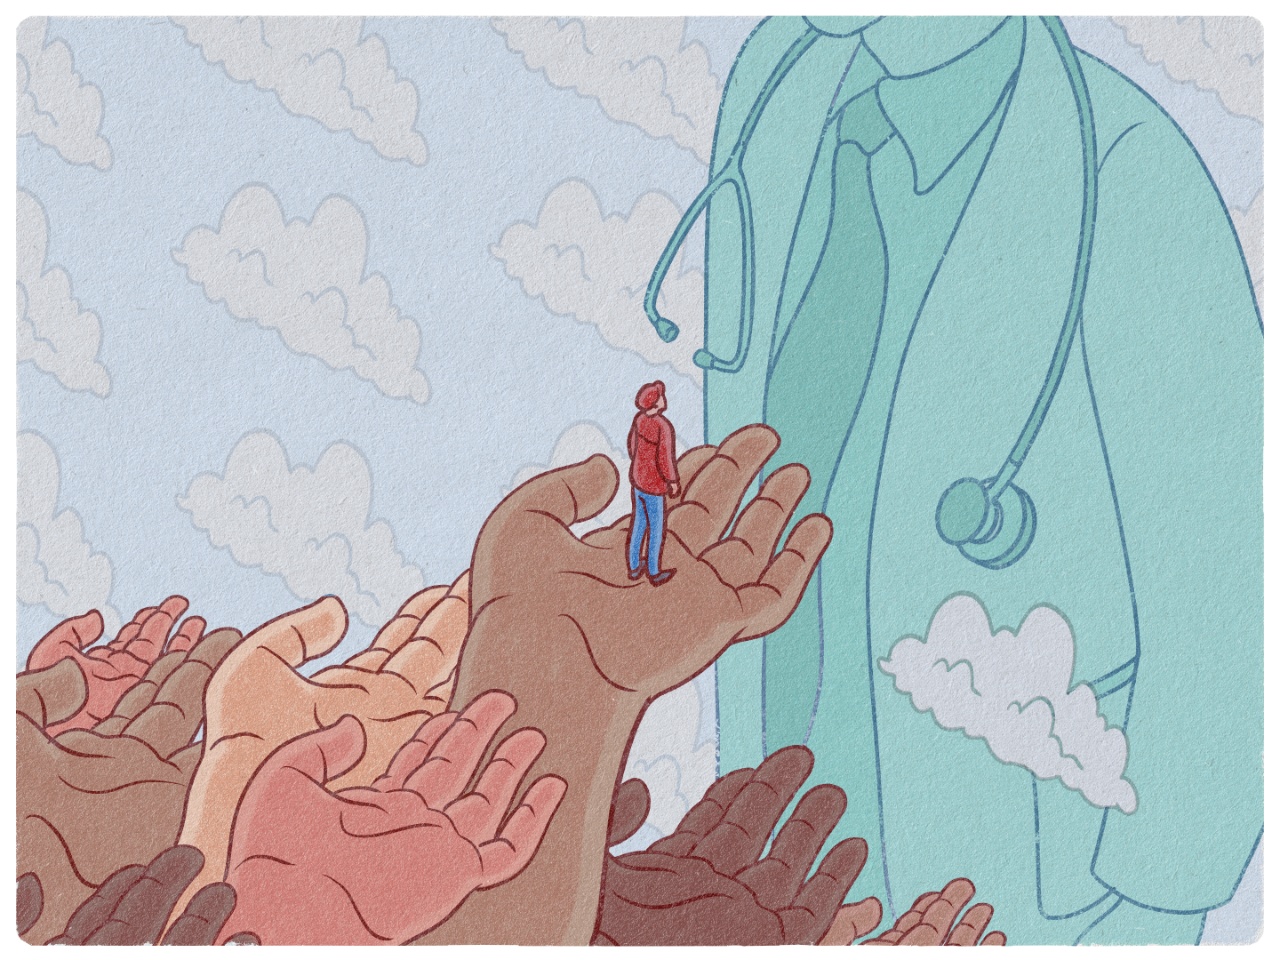 An illustration of a person receiving help with their healthcare by being lifted up on the hands of others.